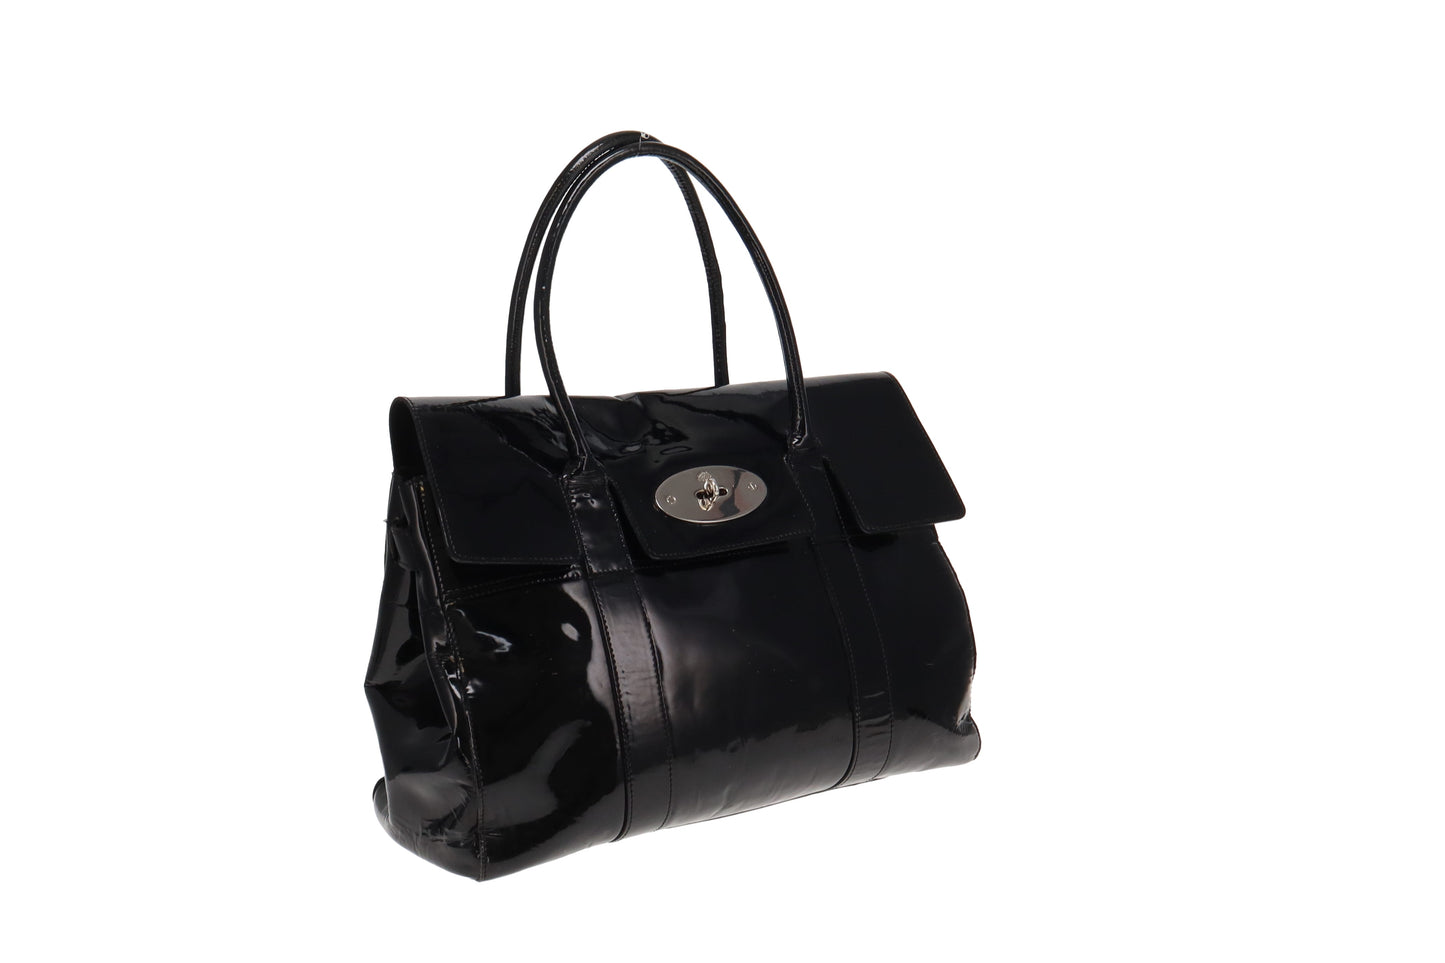 Mulberry Black Patent Classic Bayswater